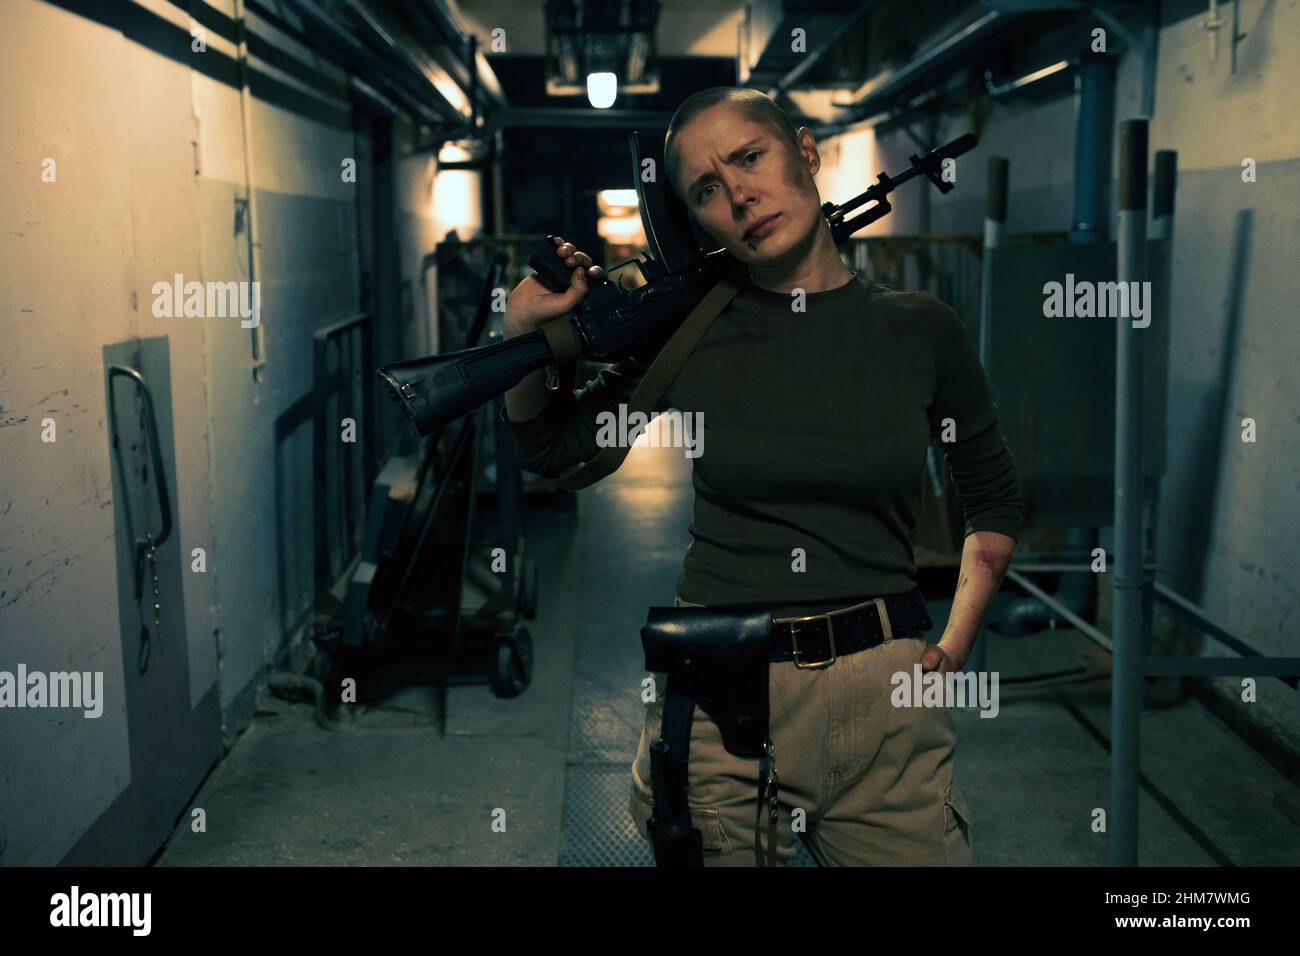 Front view portrait of tough female fighter with big gun looking at camera while standing in dark industrial hallway, copy space Stock Photo